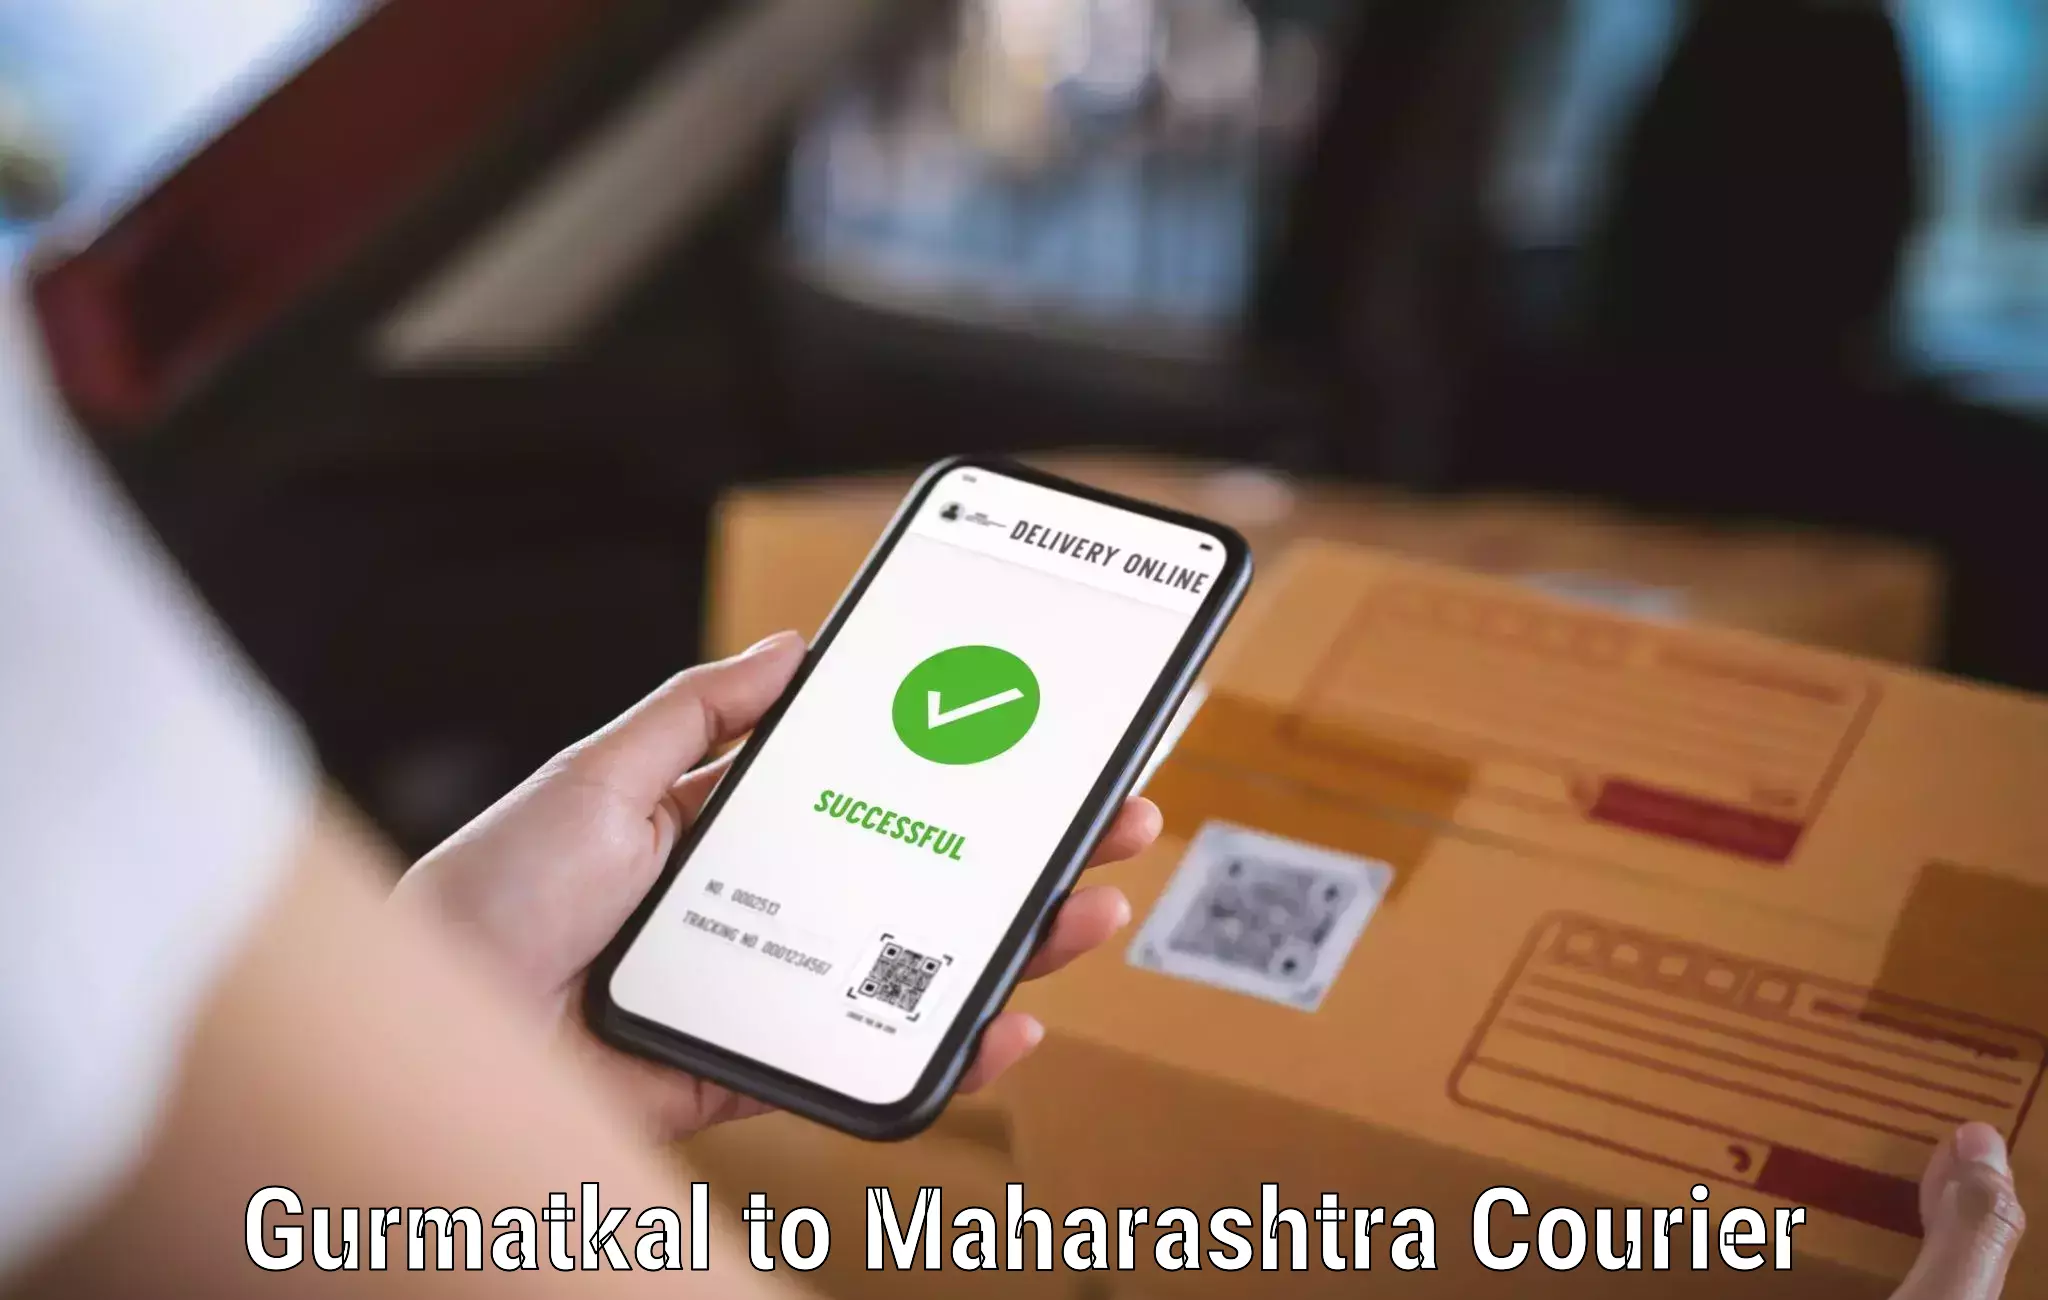 Reliable delivery network Gurmatkal to Virar